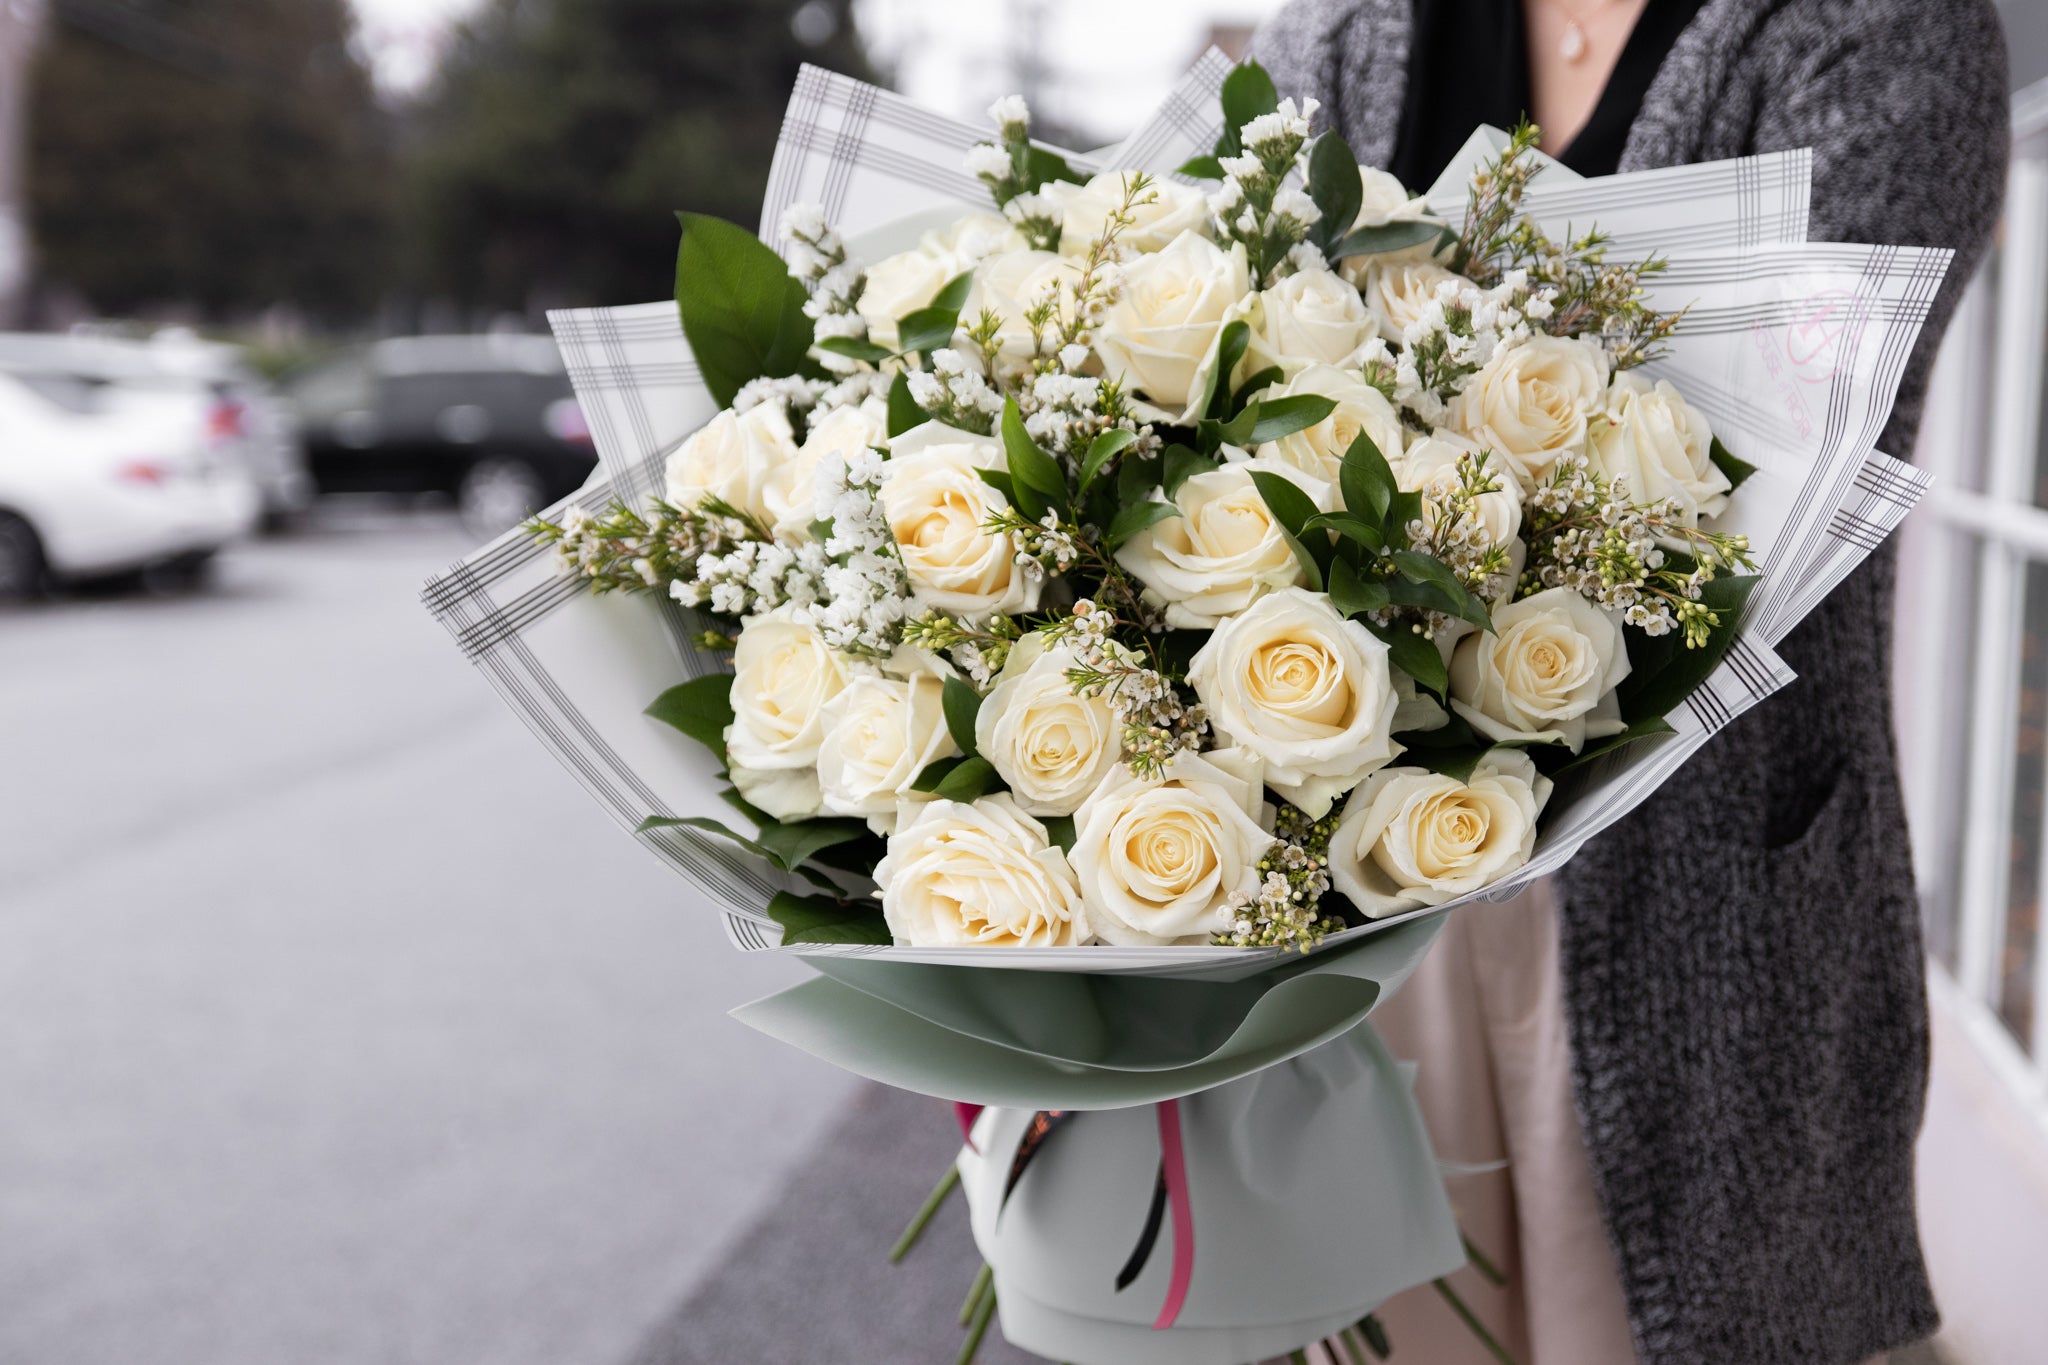 HAND-TIED BOUQUETS – House of Fiori